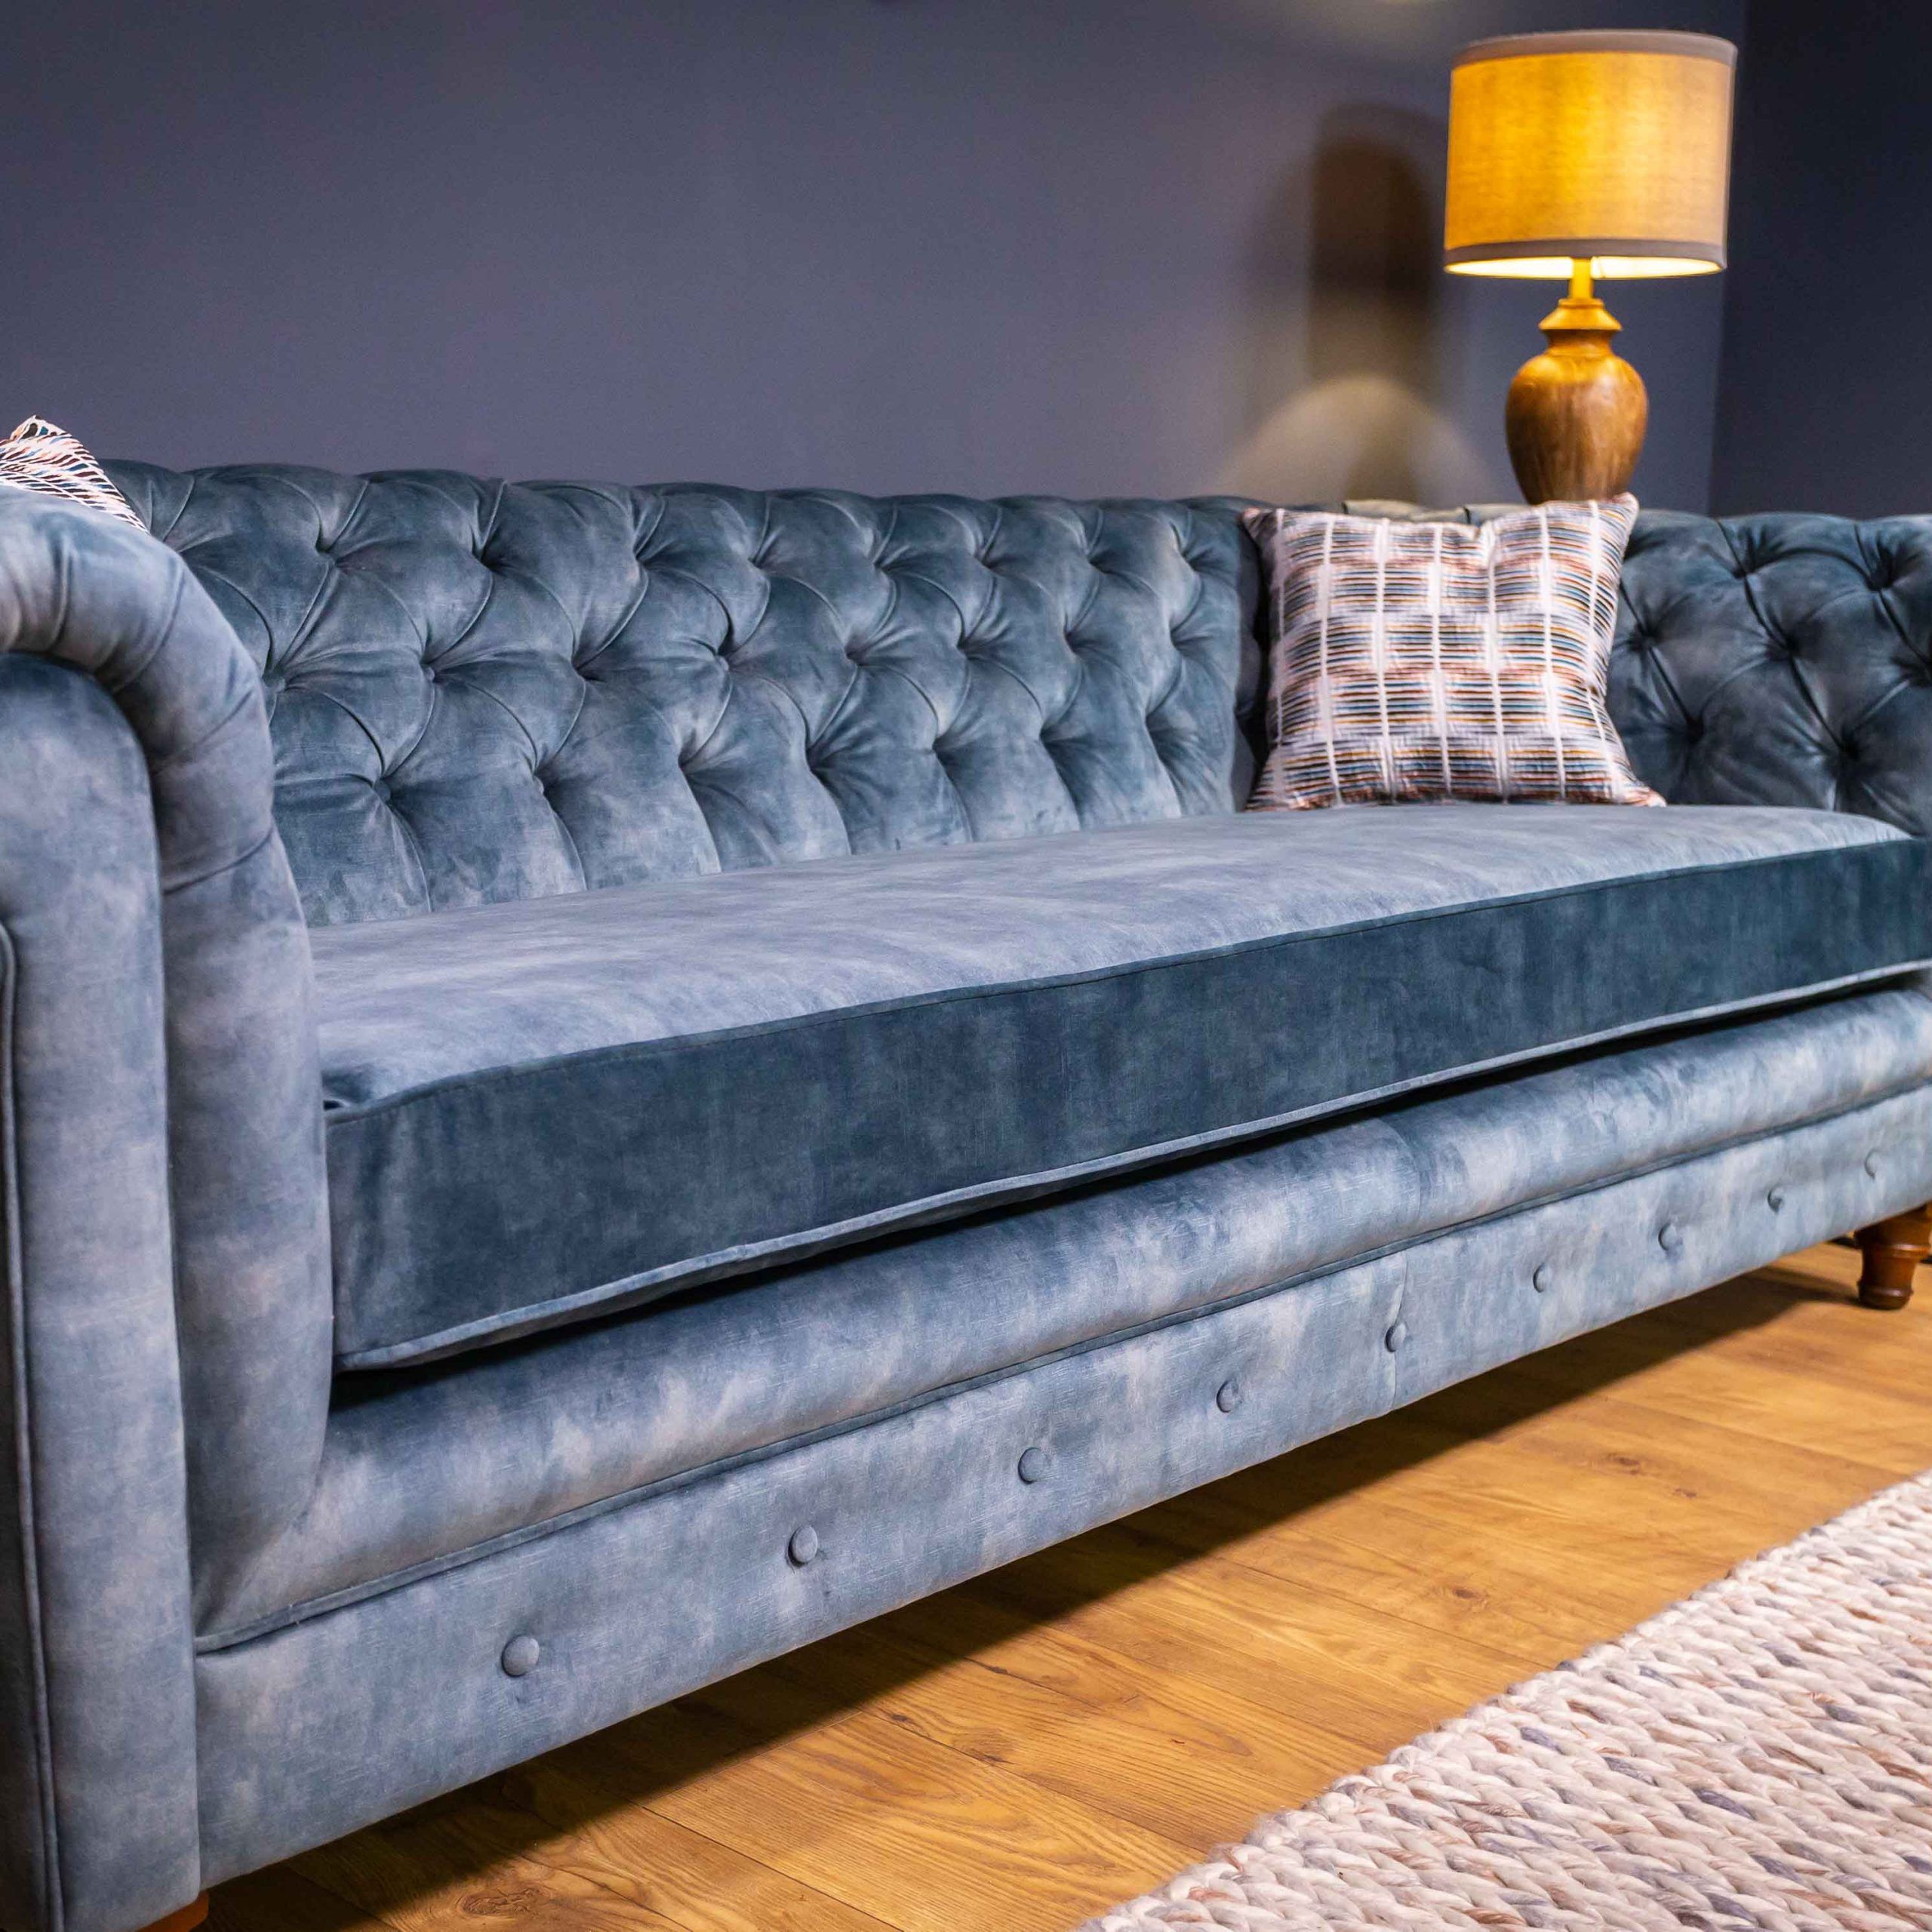 The Chesterfield Sofa | Sofa Range From Sofa Magic Bristol For Chesterfield Sofas (Gallery 1 of 20)